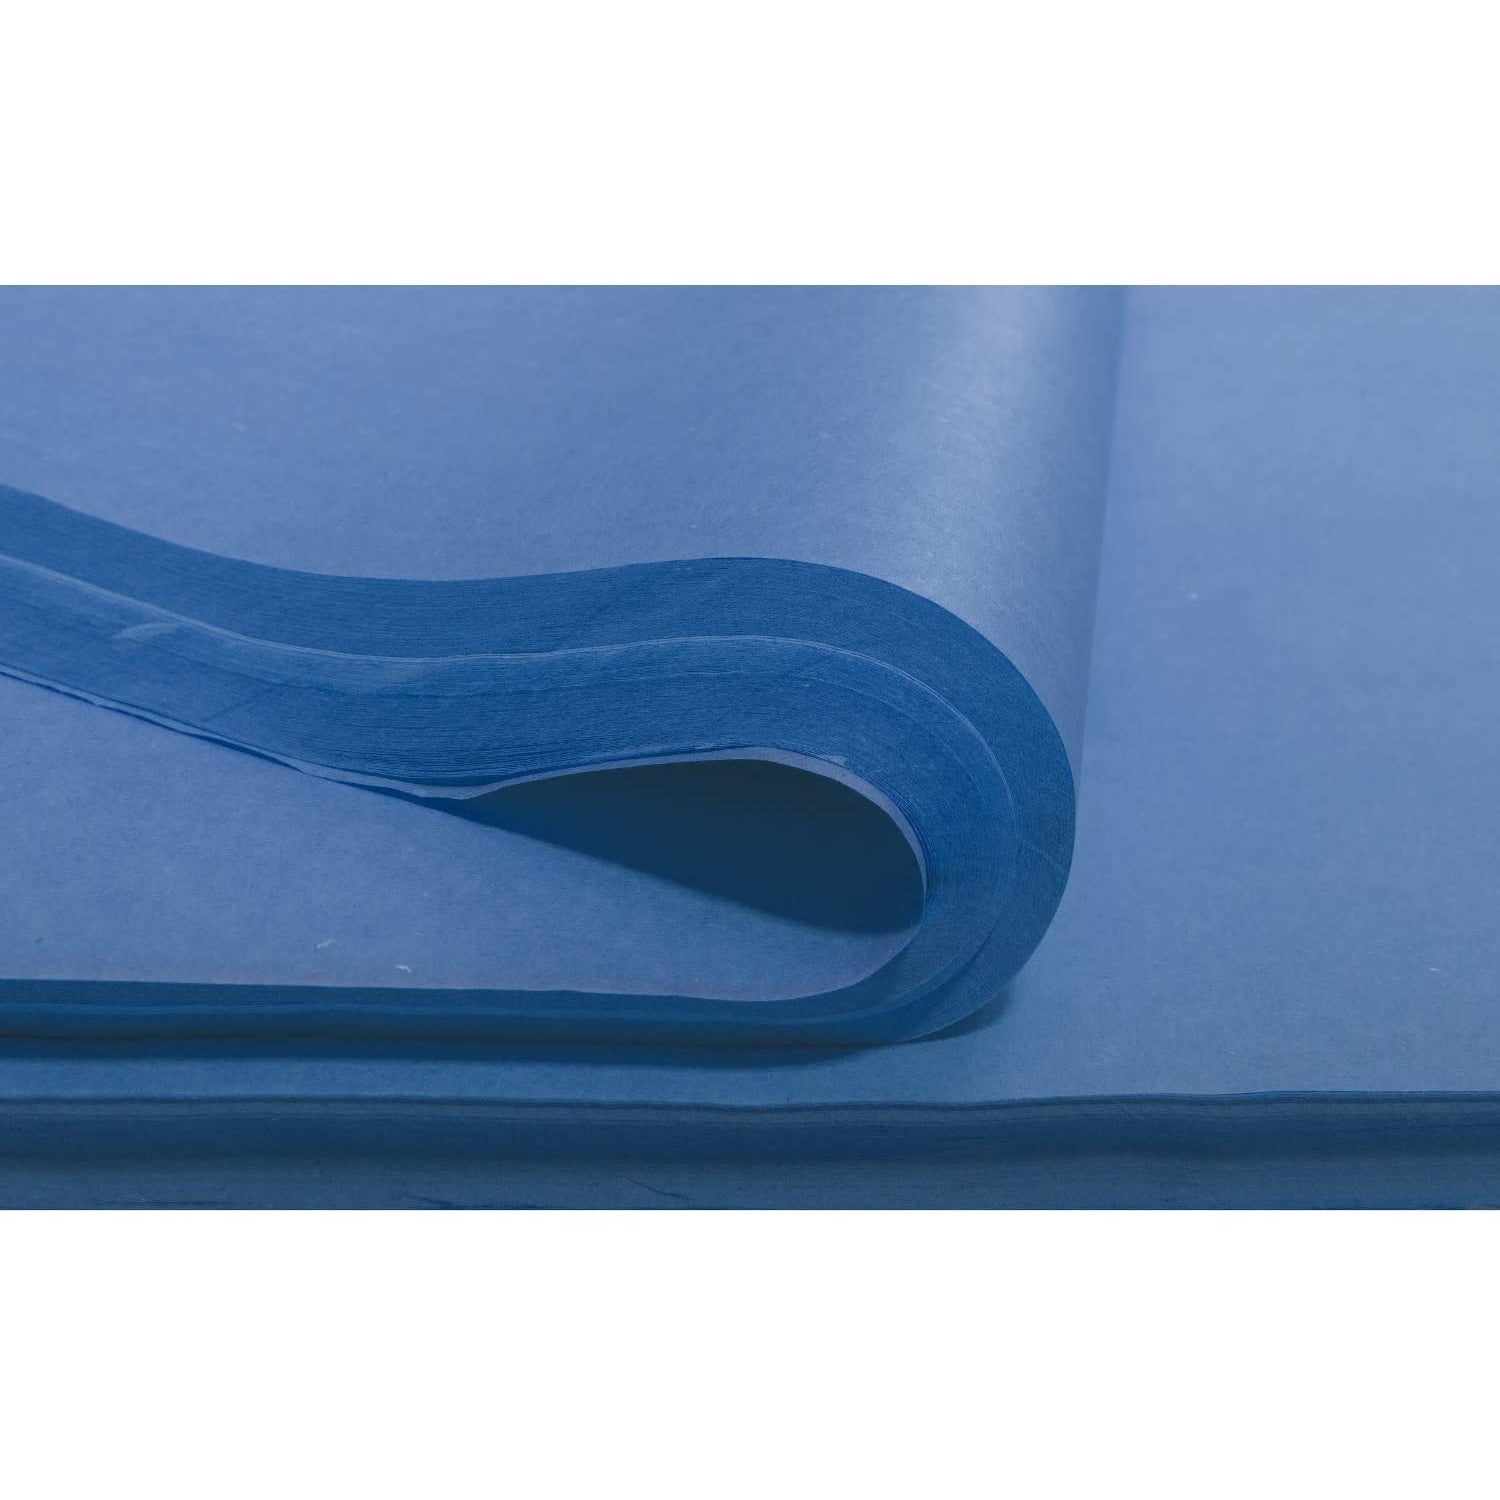 Tissue Paper Sheets - 15 x 20, Royal Blue S-13177ROY - Uline